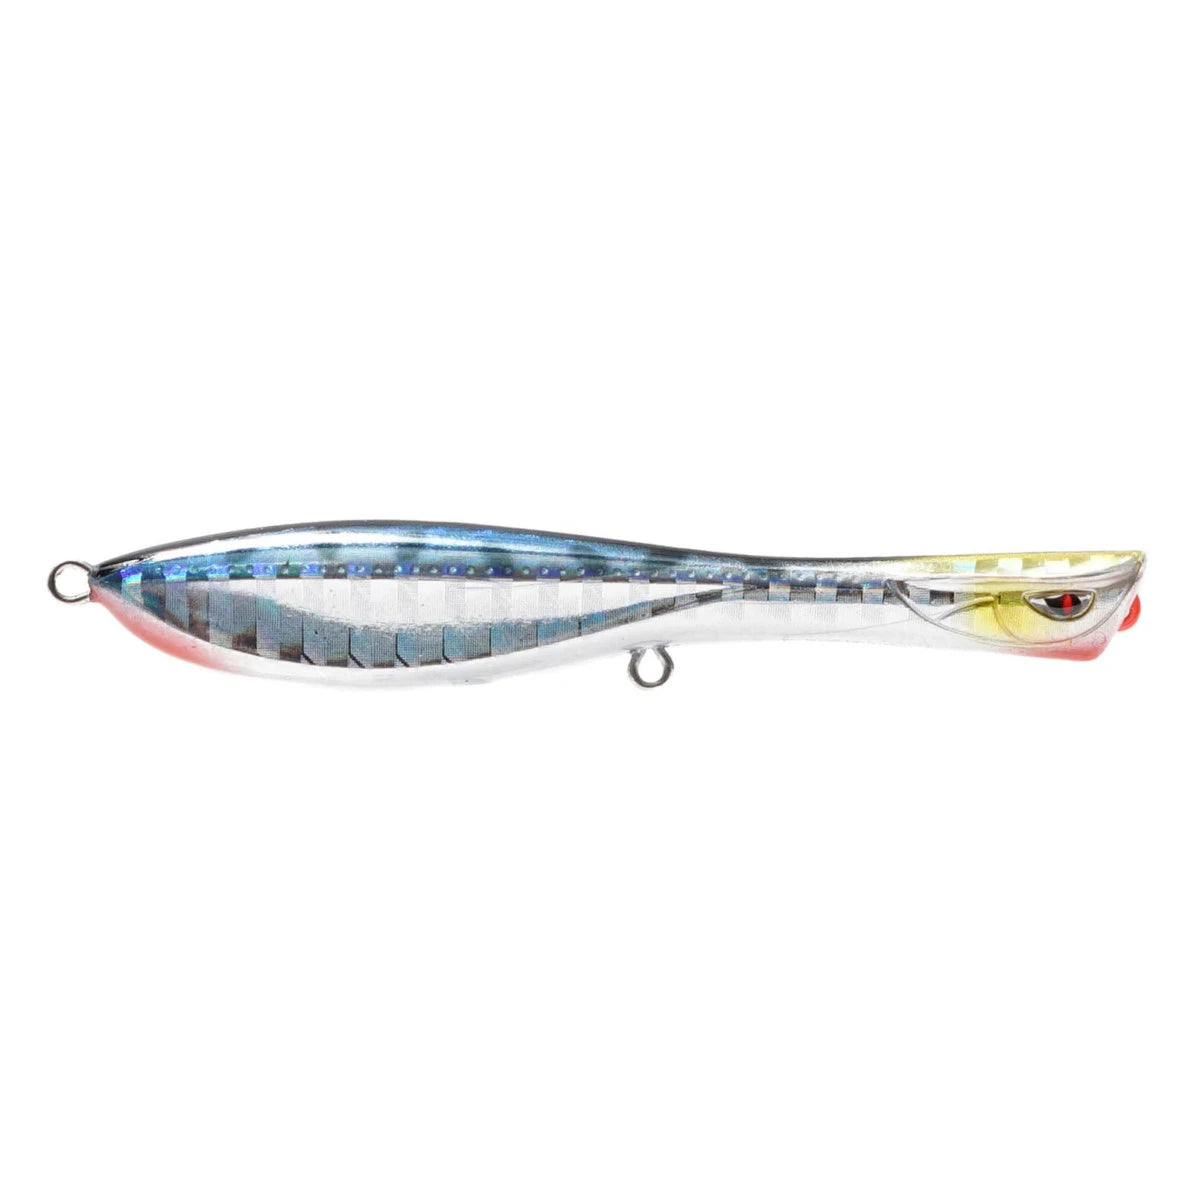 Nomad Dartwing Long Cast Sinking 130mm Lure-Lure - Poppers, Stickbaits & Pencils-Nomad-Sardine-Fishing Station